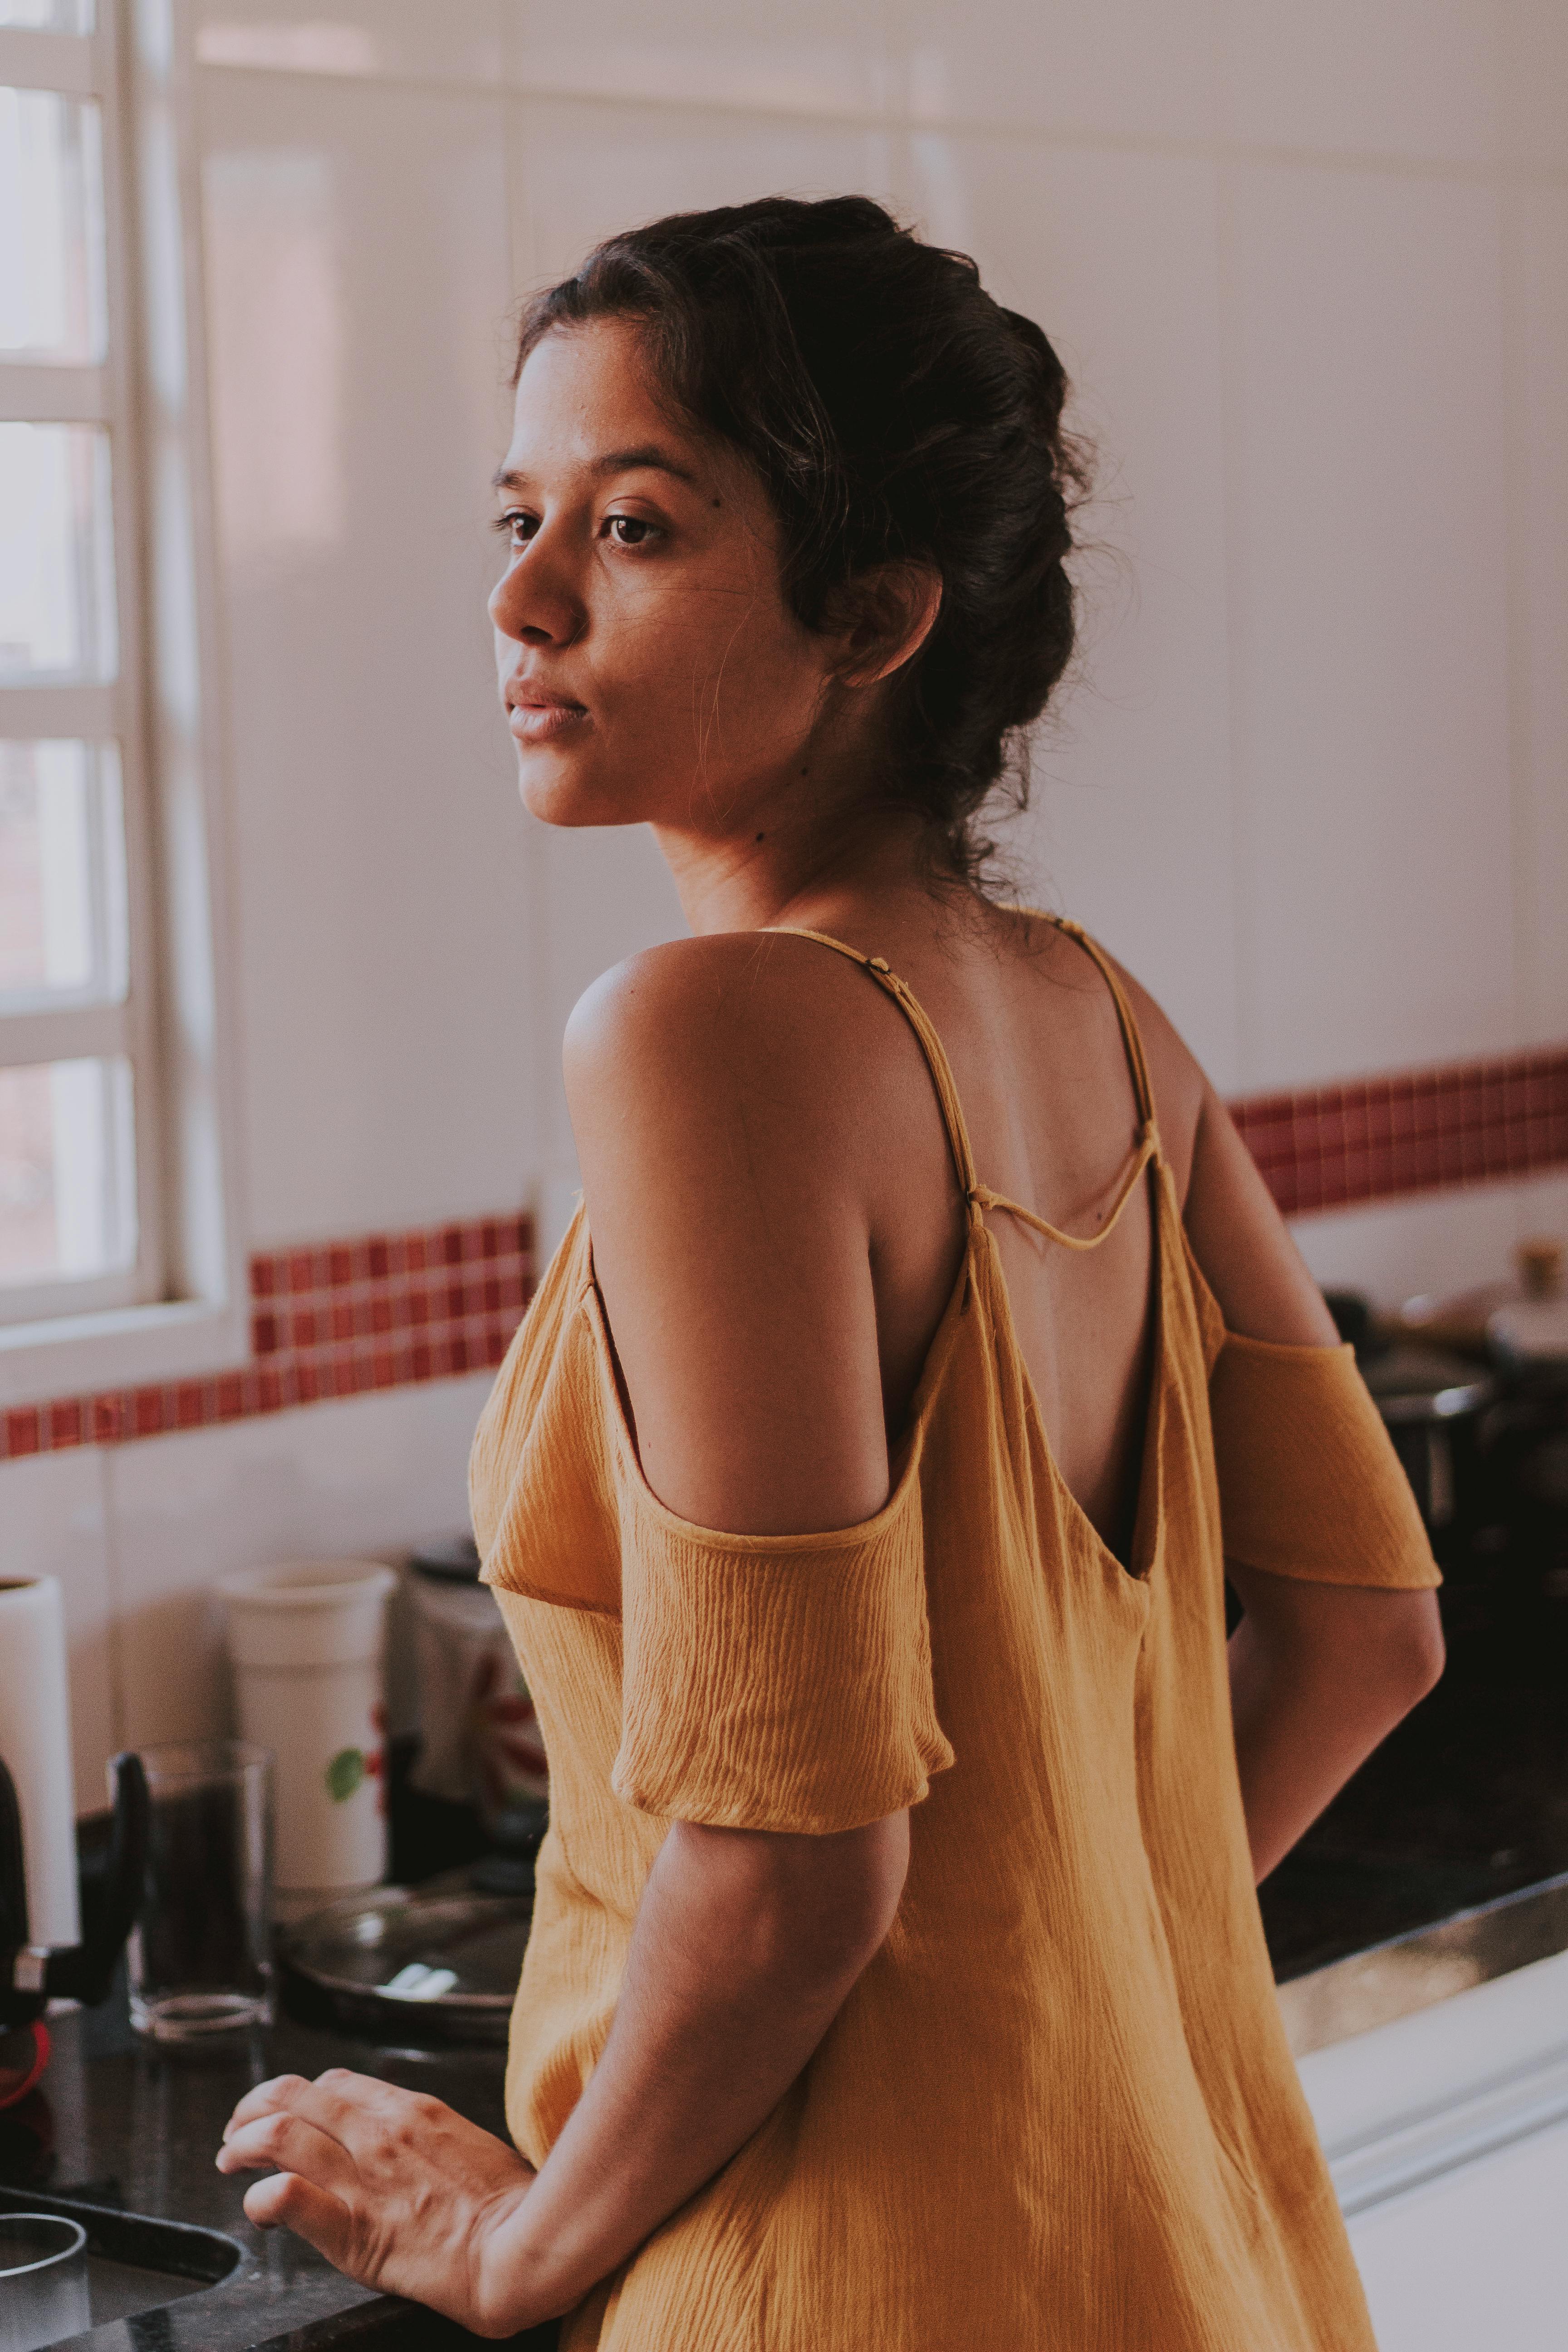 A woman looking upset while standing in the kitchen | Source: Pexels